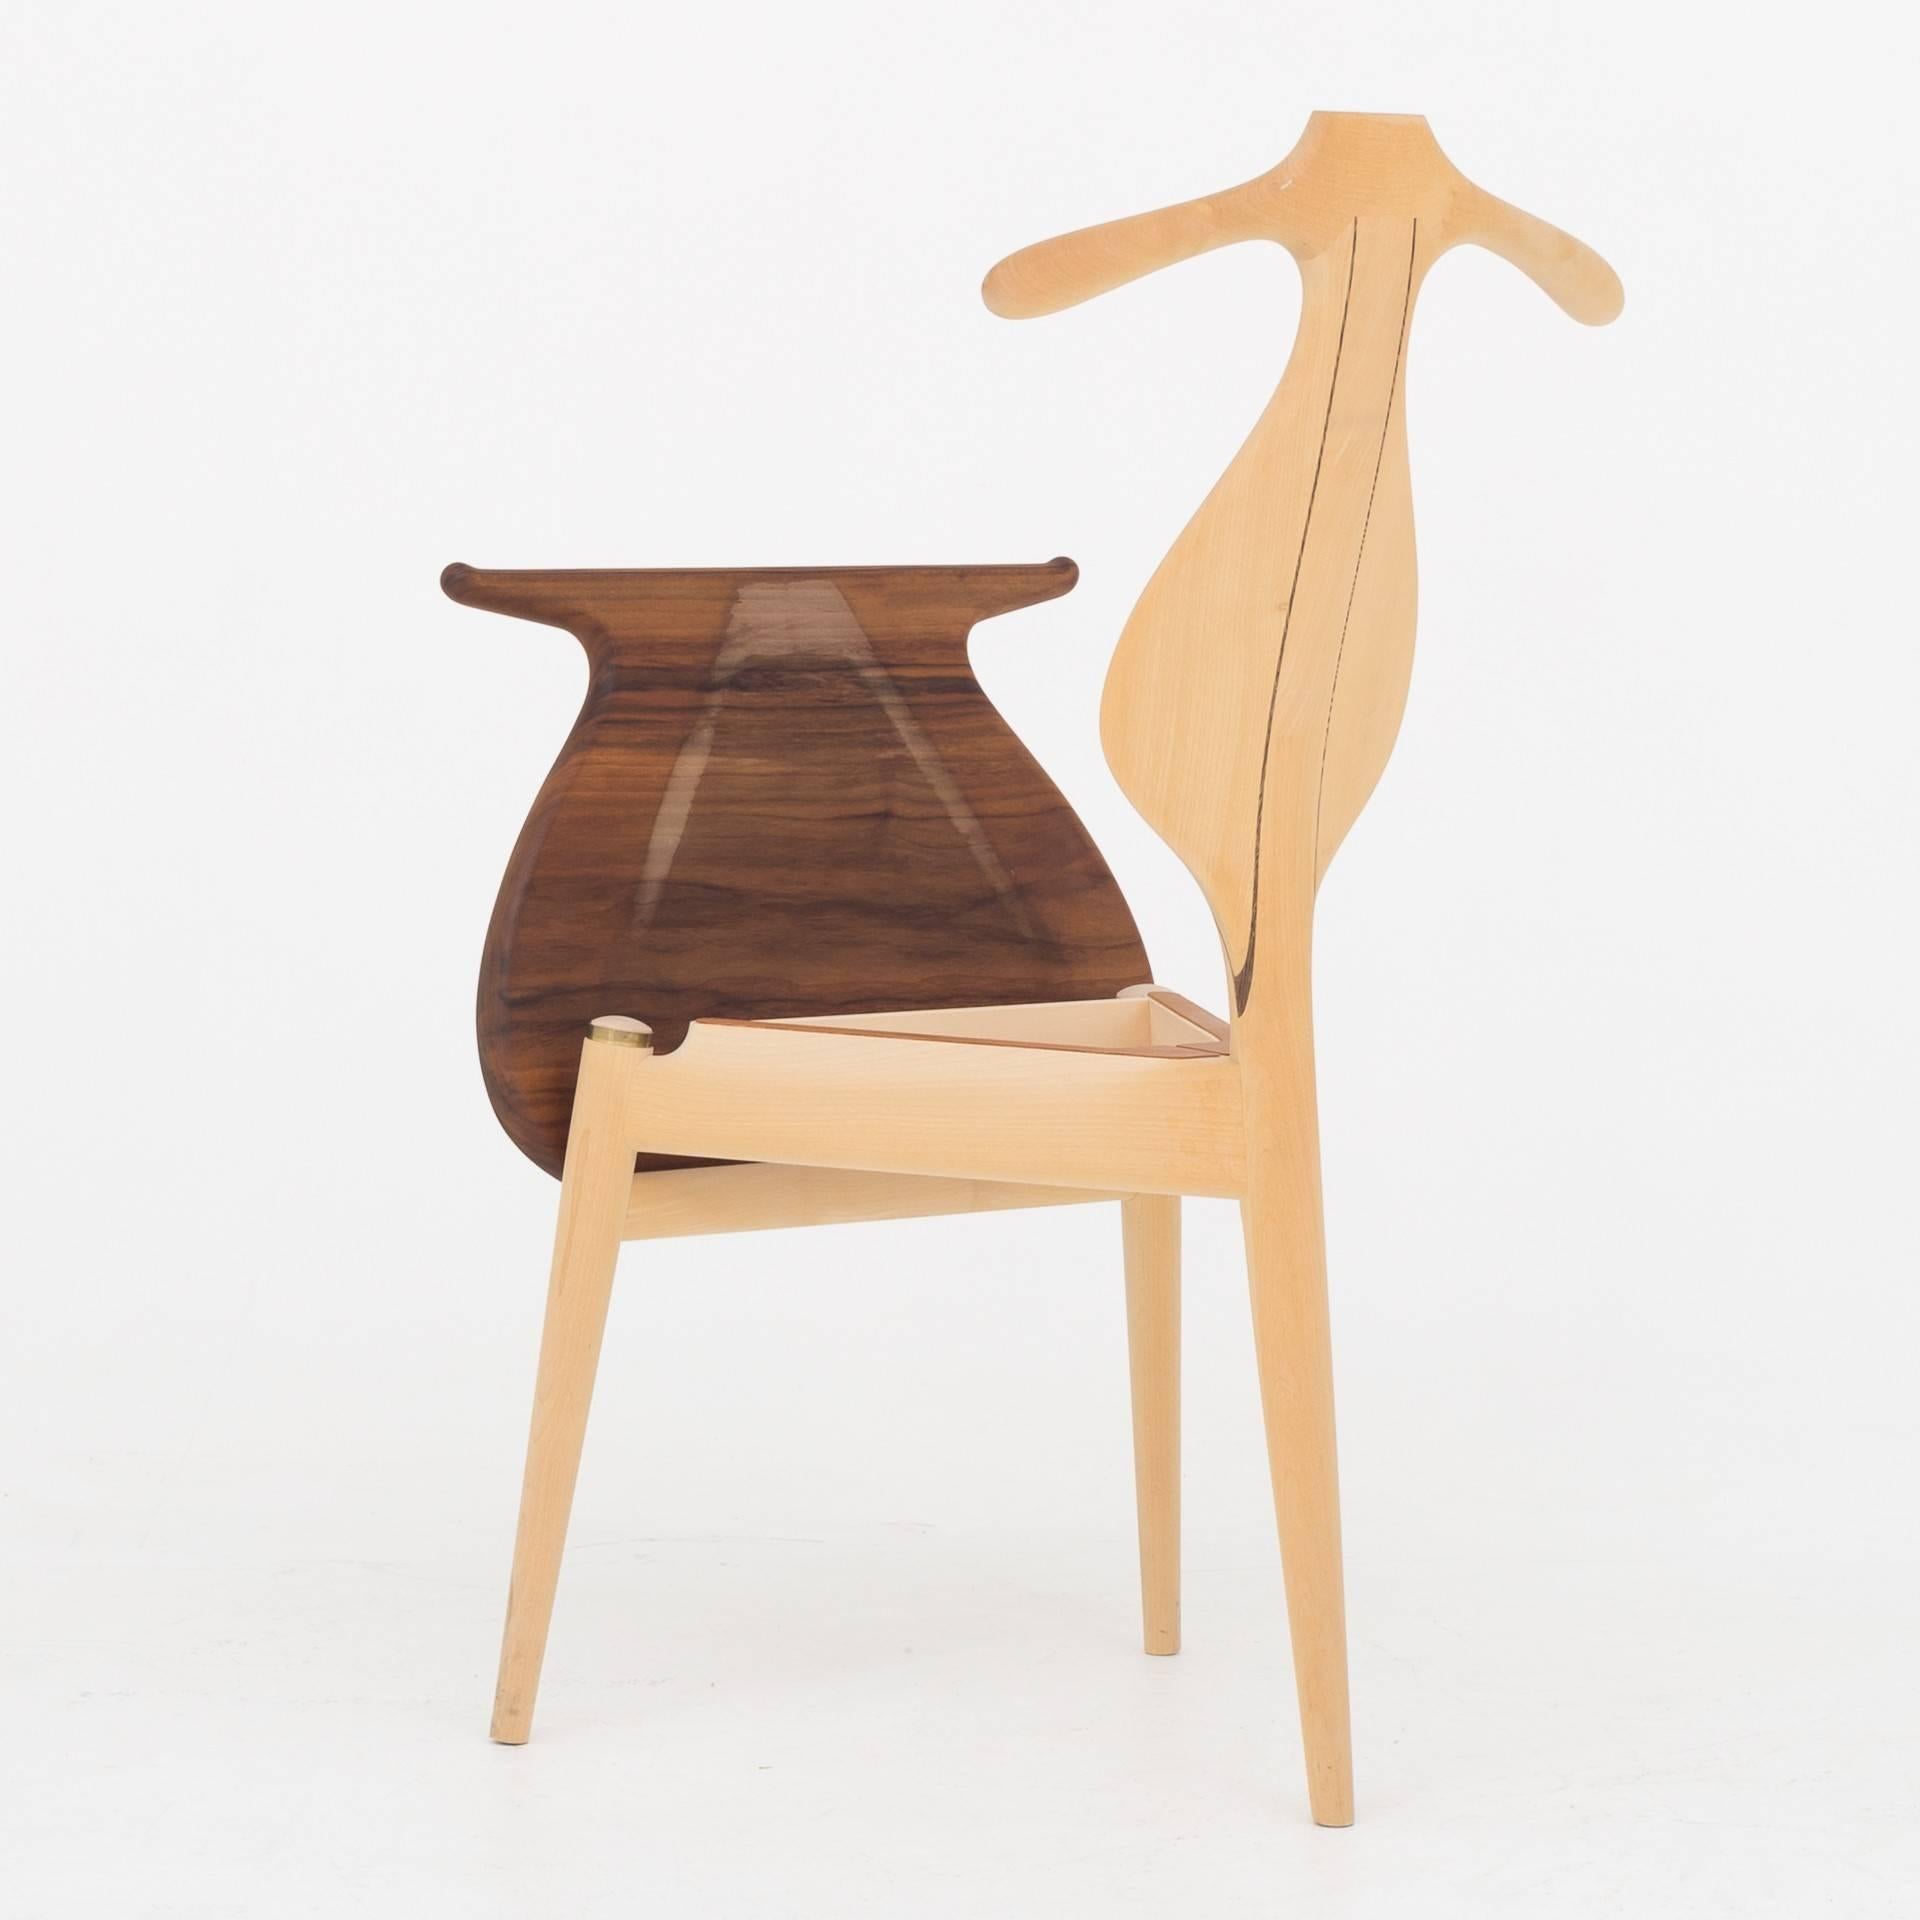 PP 250, The Valet chair in maple with seat of walnut. Designed in 1951.